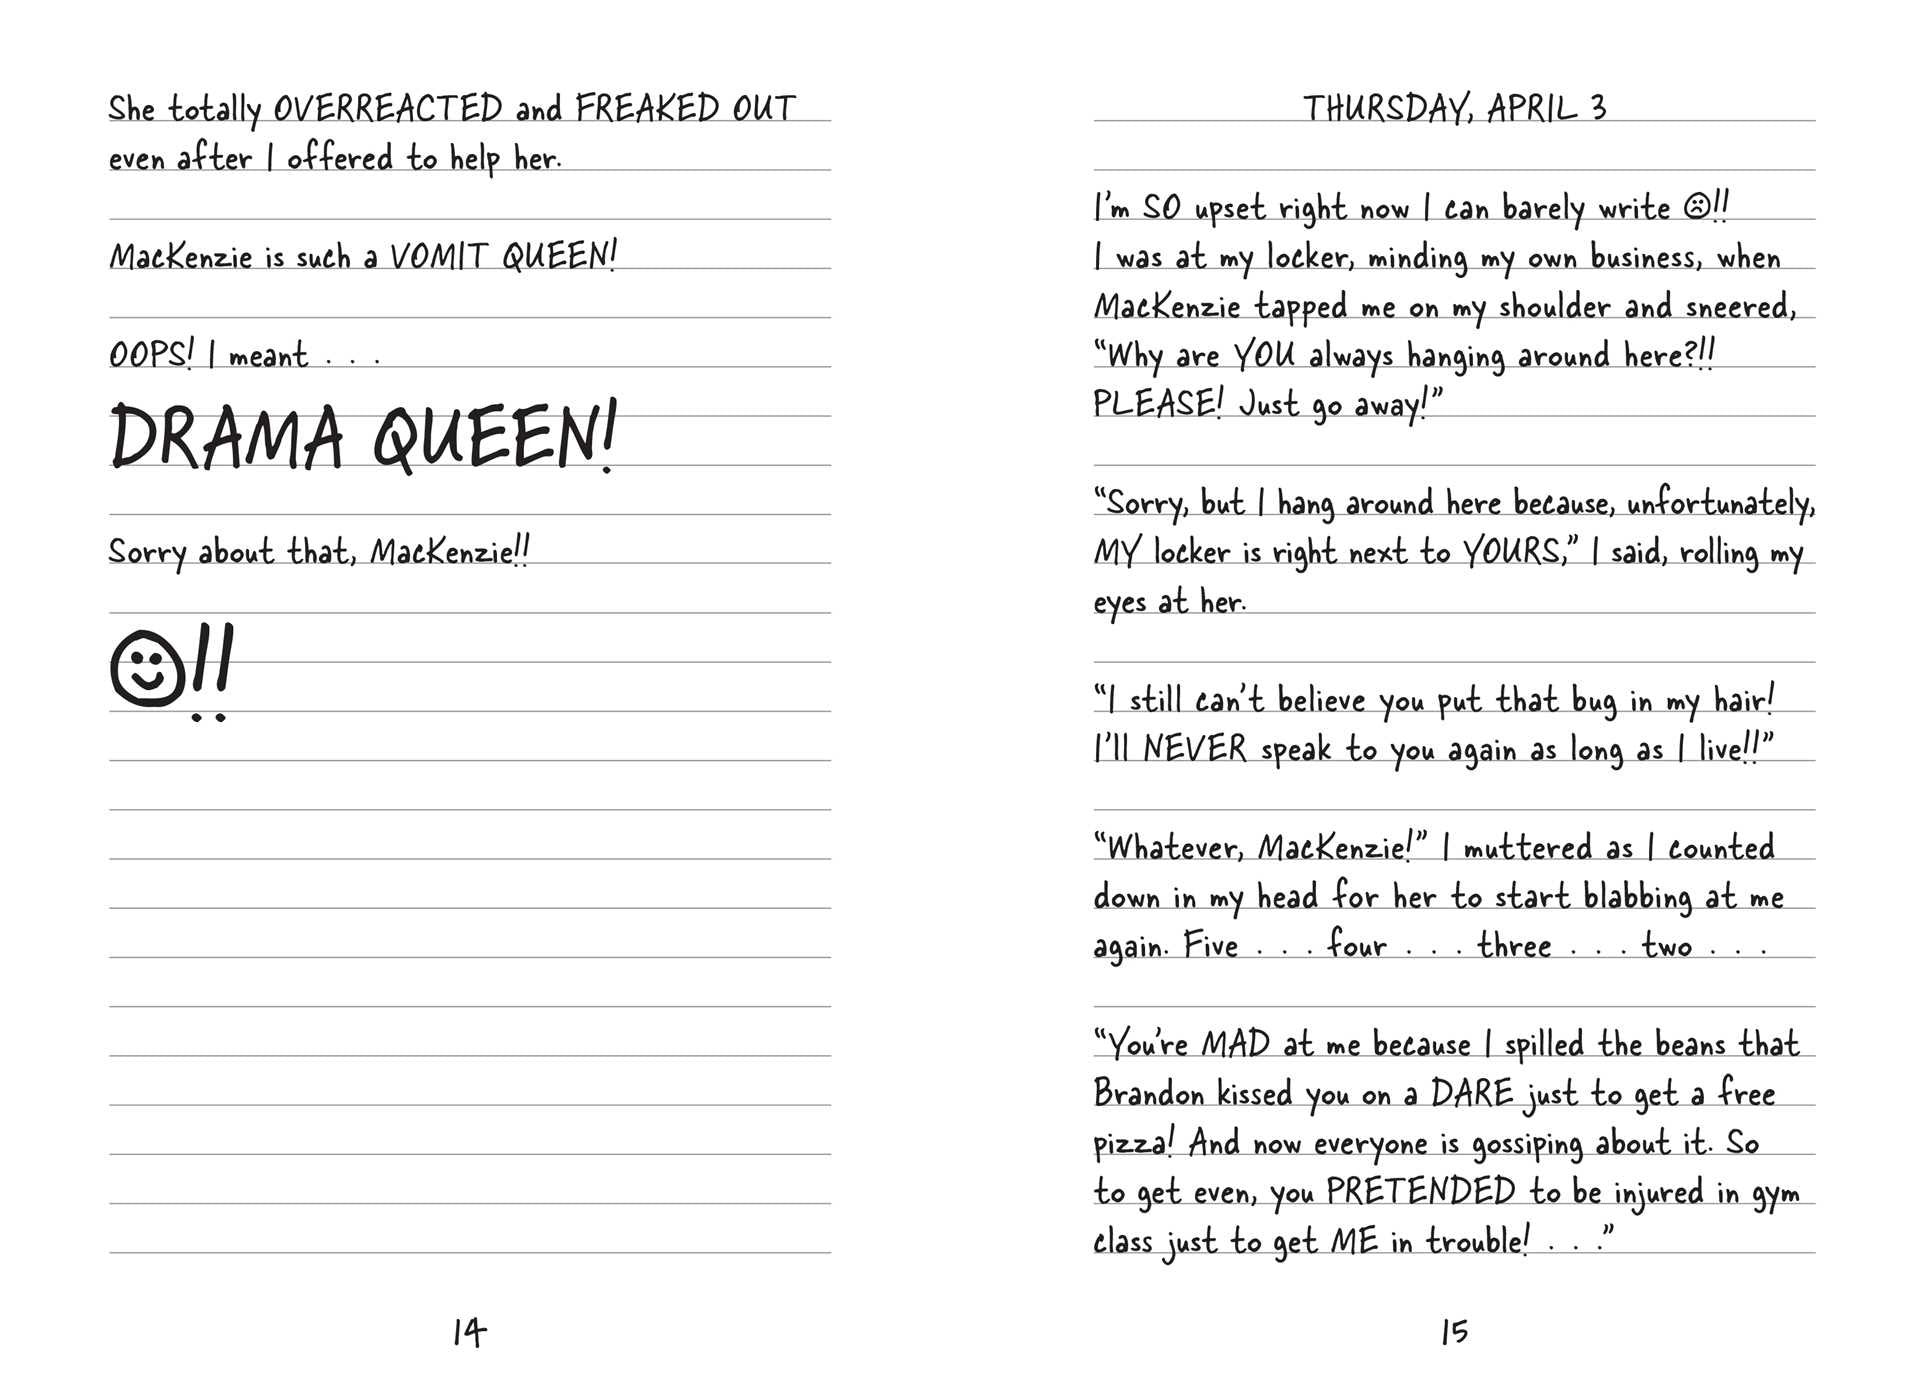 Dork　Hardcover　for　Not-So-Dorky　Diaries　Fashions　Drama　a　9:　–　Tales　Home　from　Queen　(9)　–